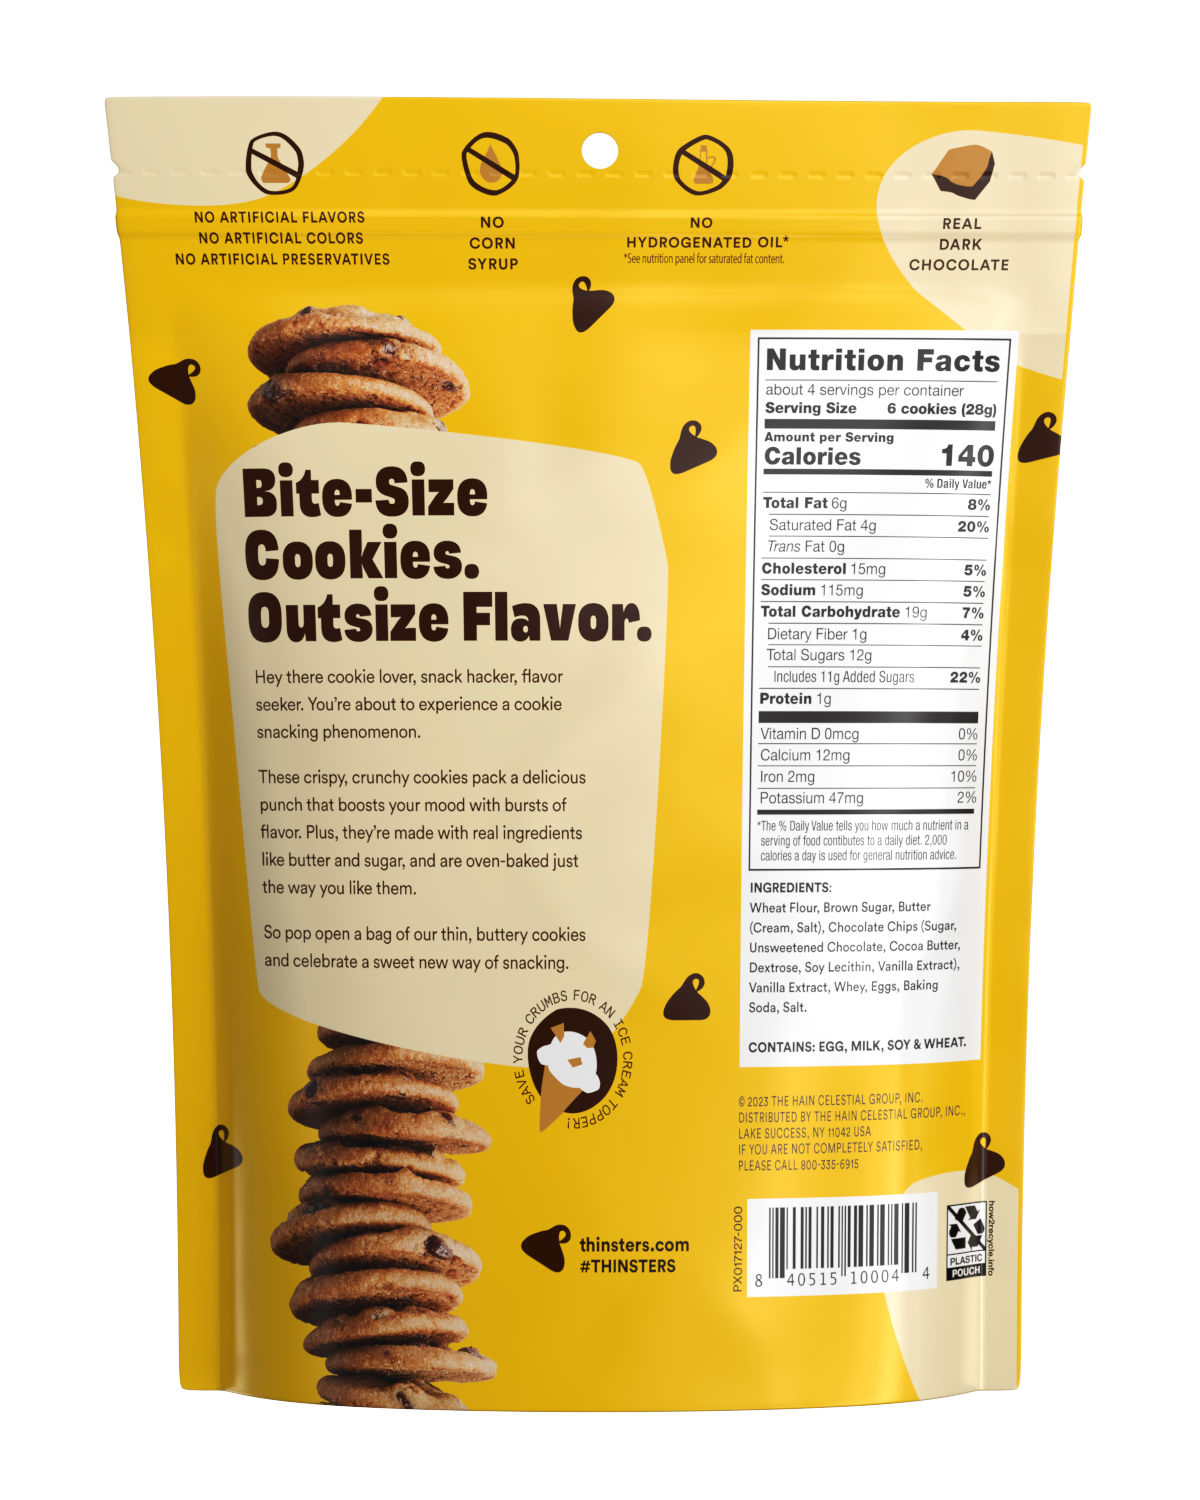 Chocolate Chip multipack